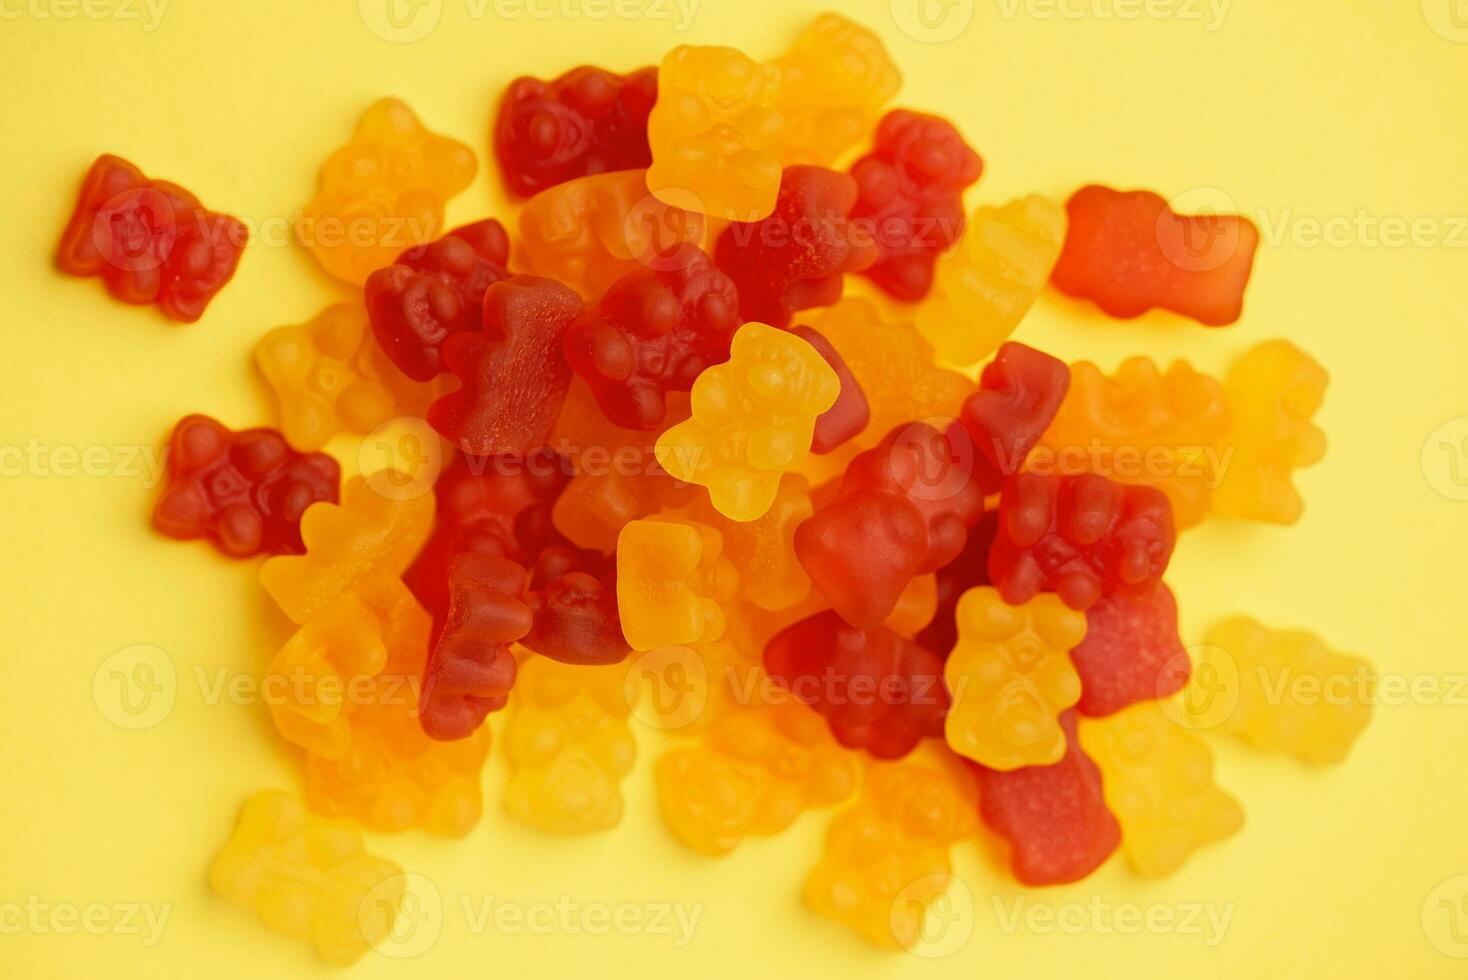 Vitamins for children,  as jelly gummy bears candy photo